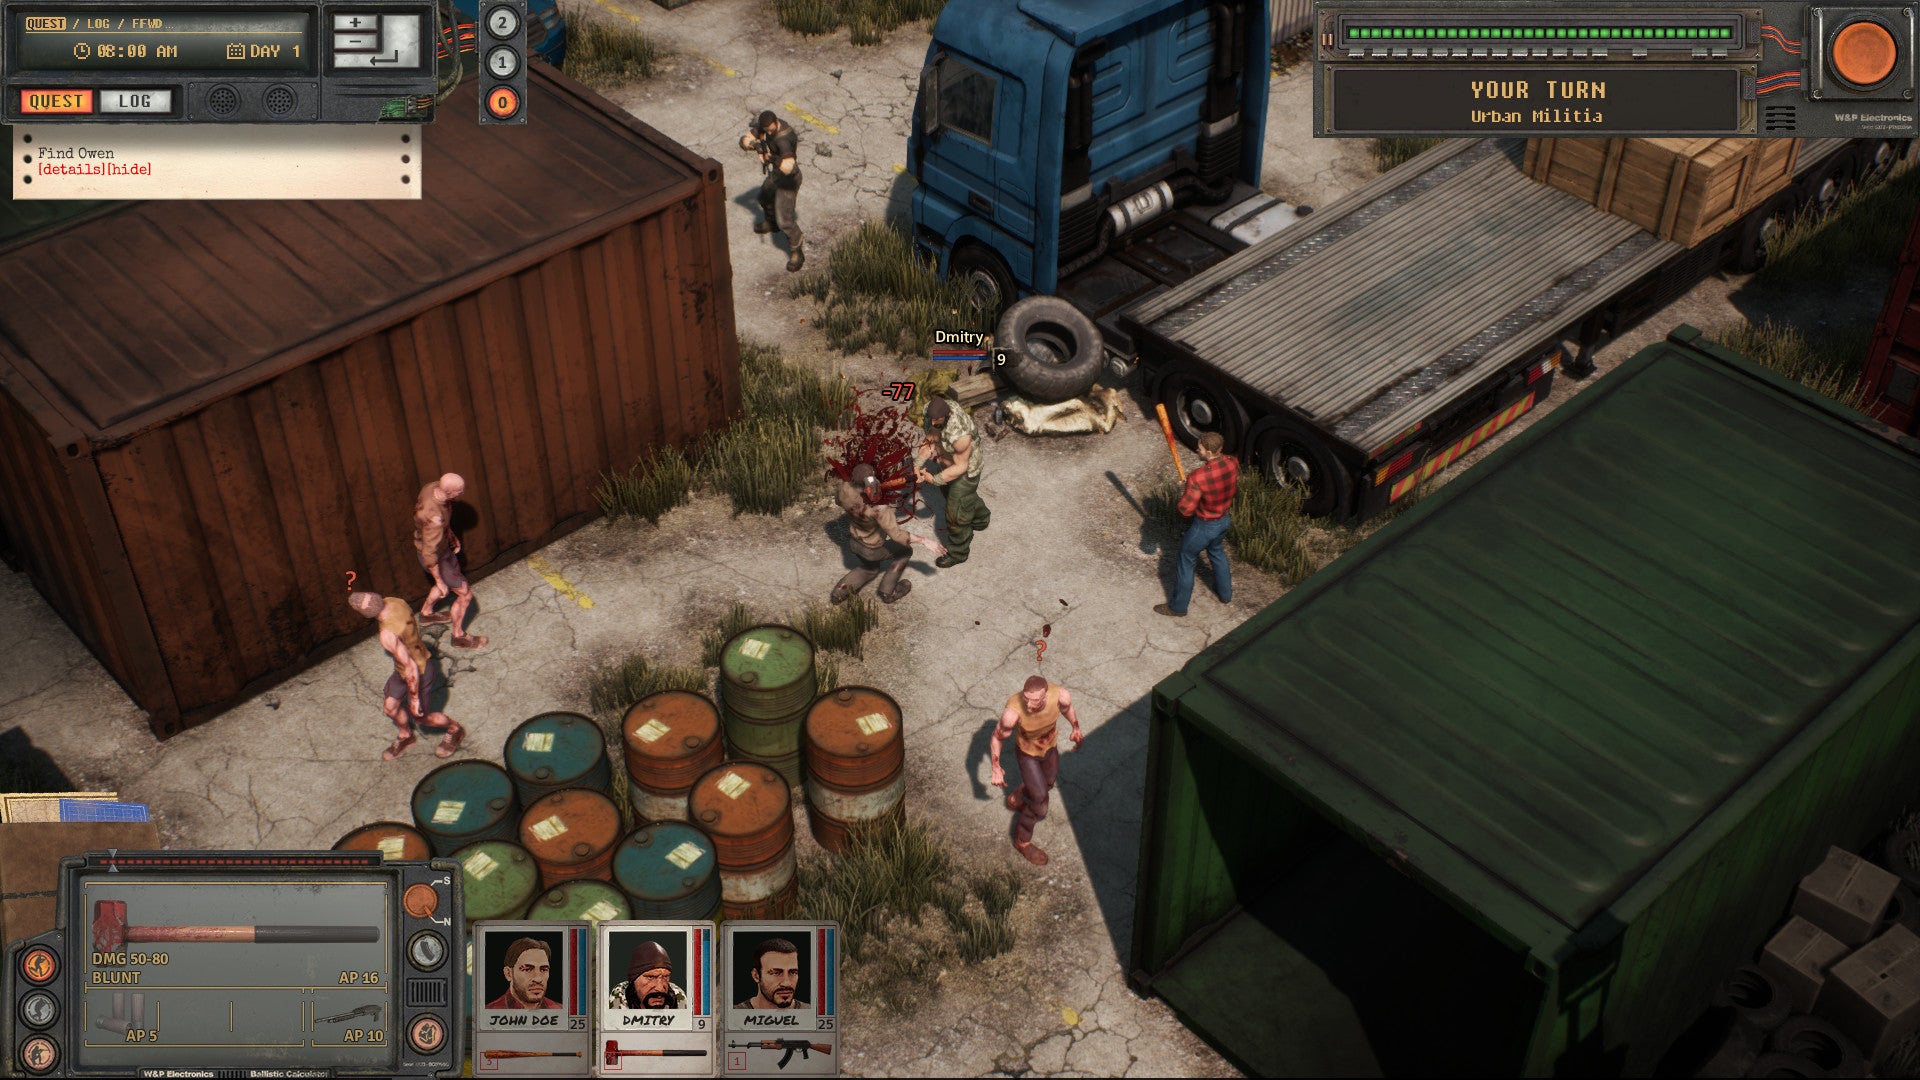 A group of humans bash in some zombies next to some shipping containers in Urban Strife